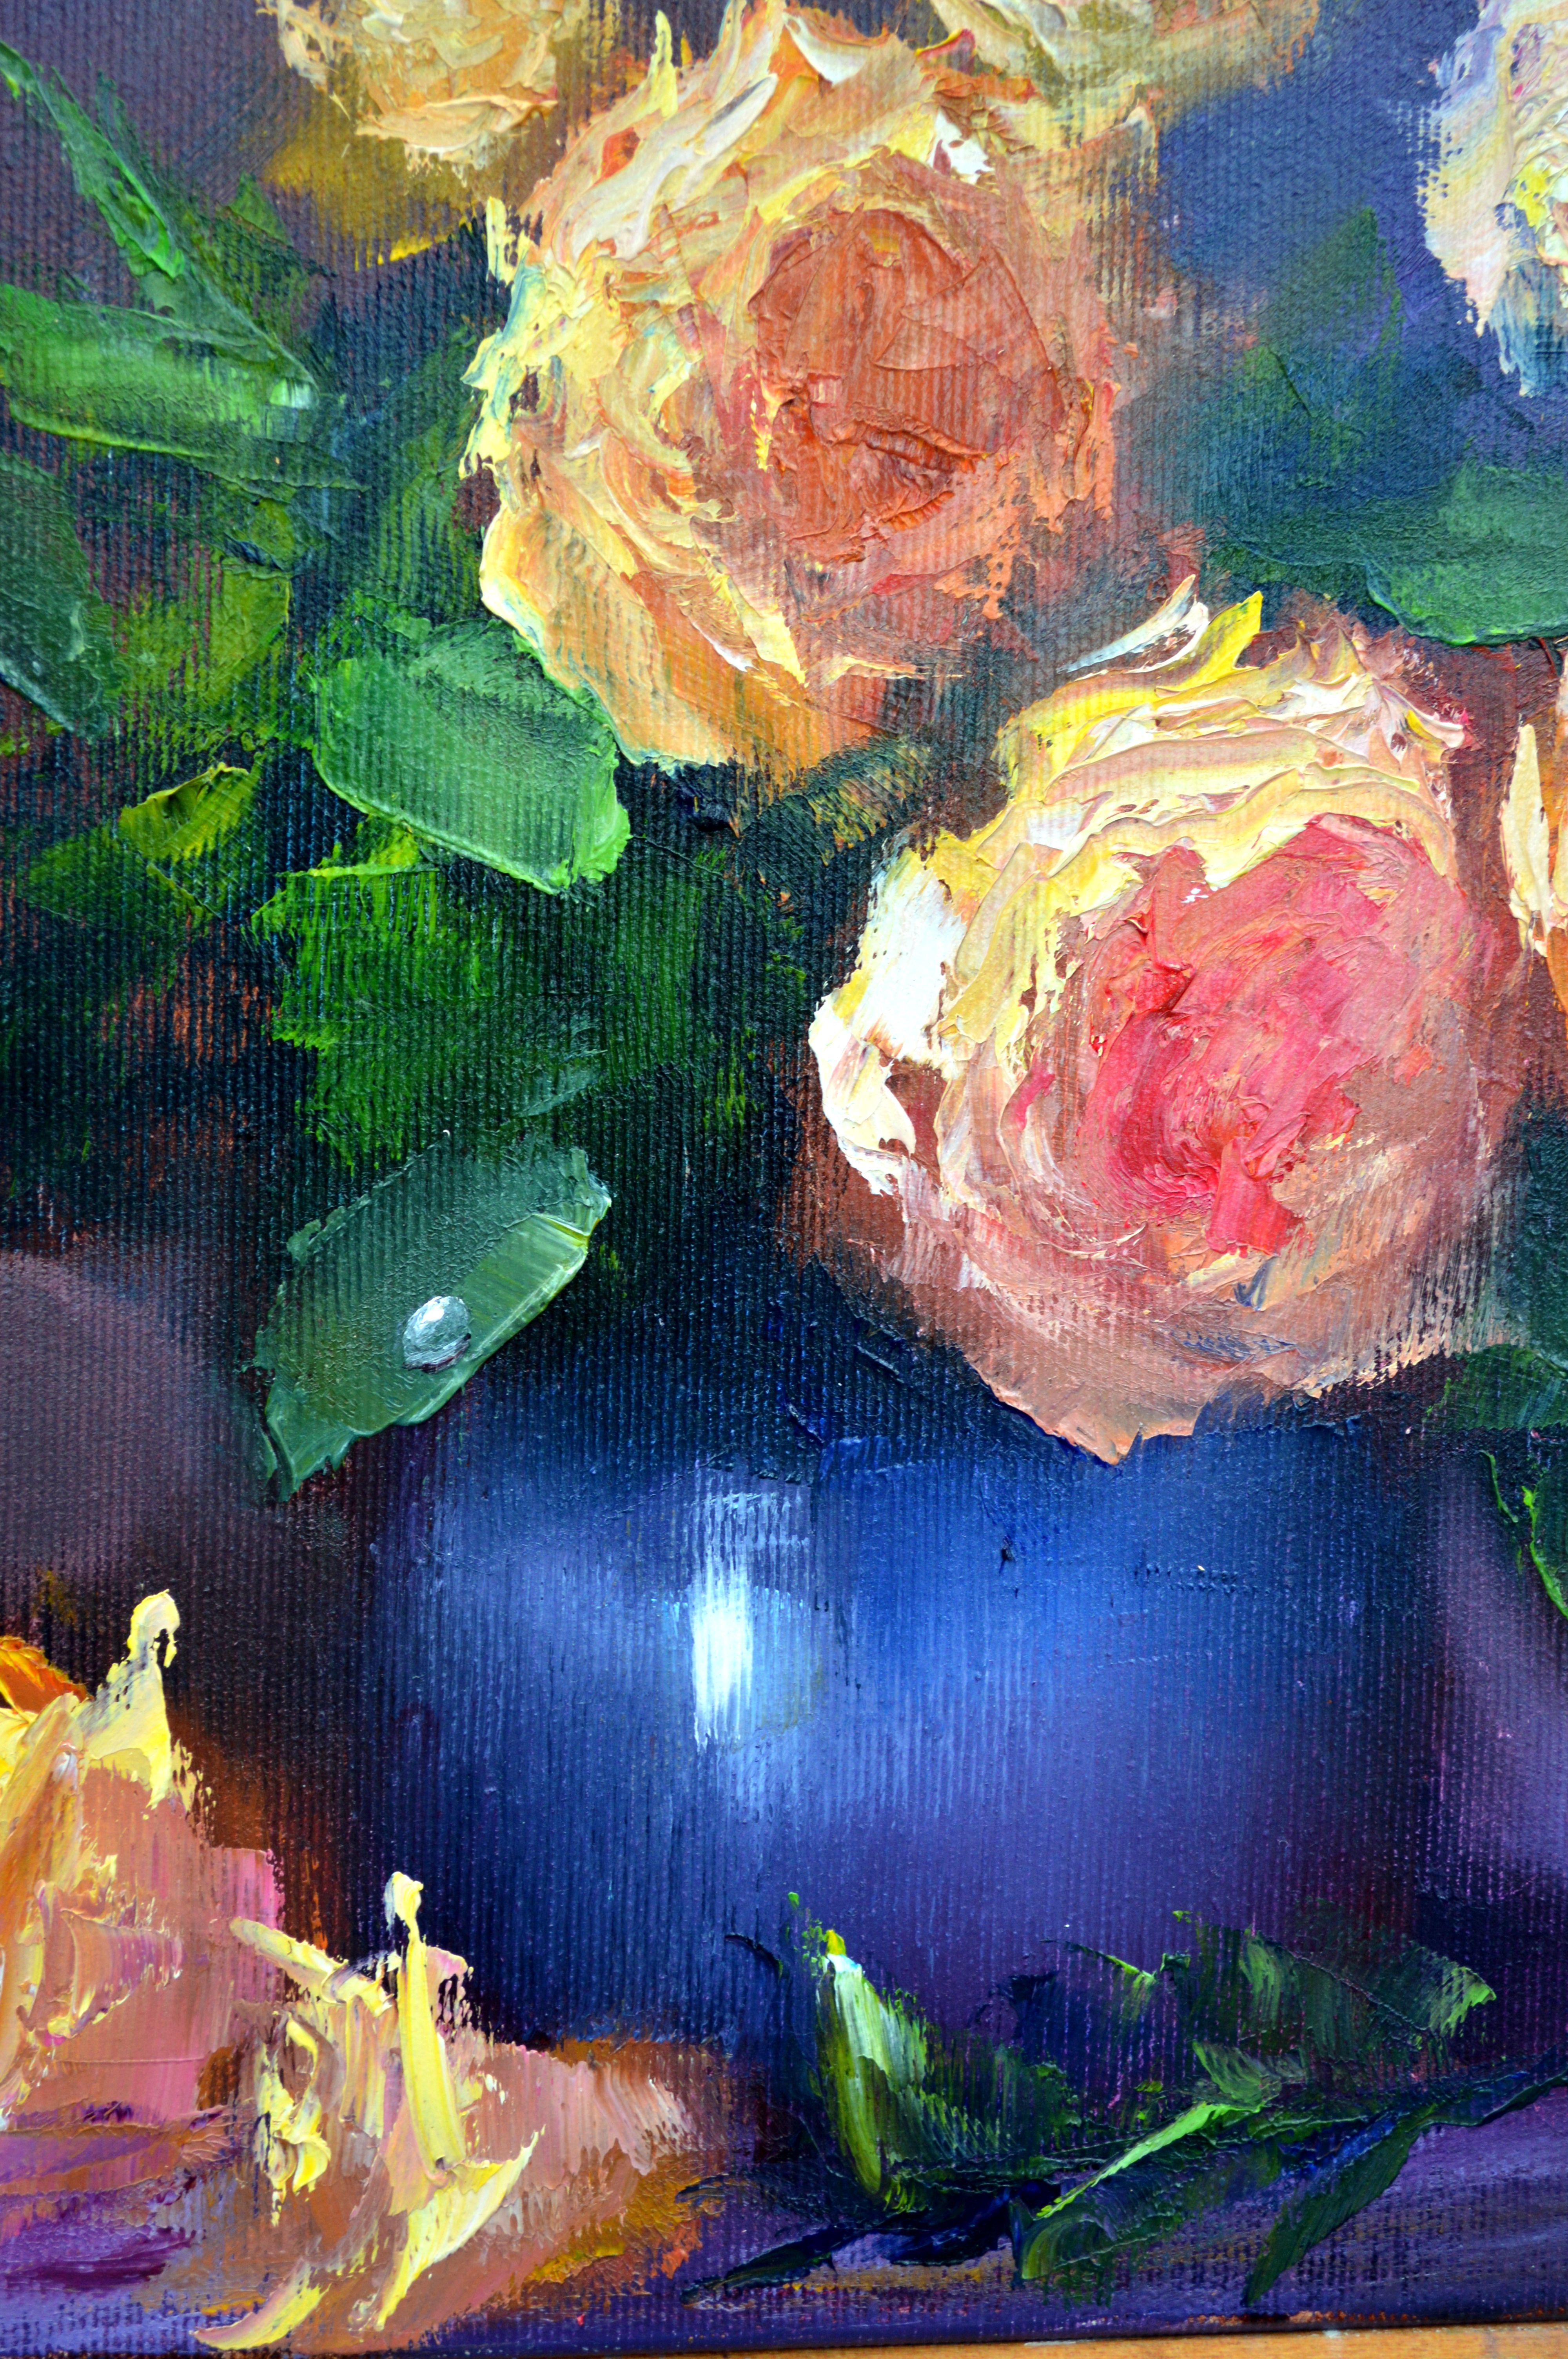 In this piece, I sought to capture the harmony of contrasts, where the warmth of the yellow roses breathes life into the remarkable depth of the blue vase. 
The brushstrokes are deliberate and vivid, expressing my spontaneity and passion. This